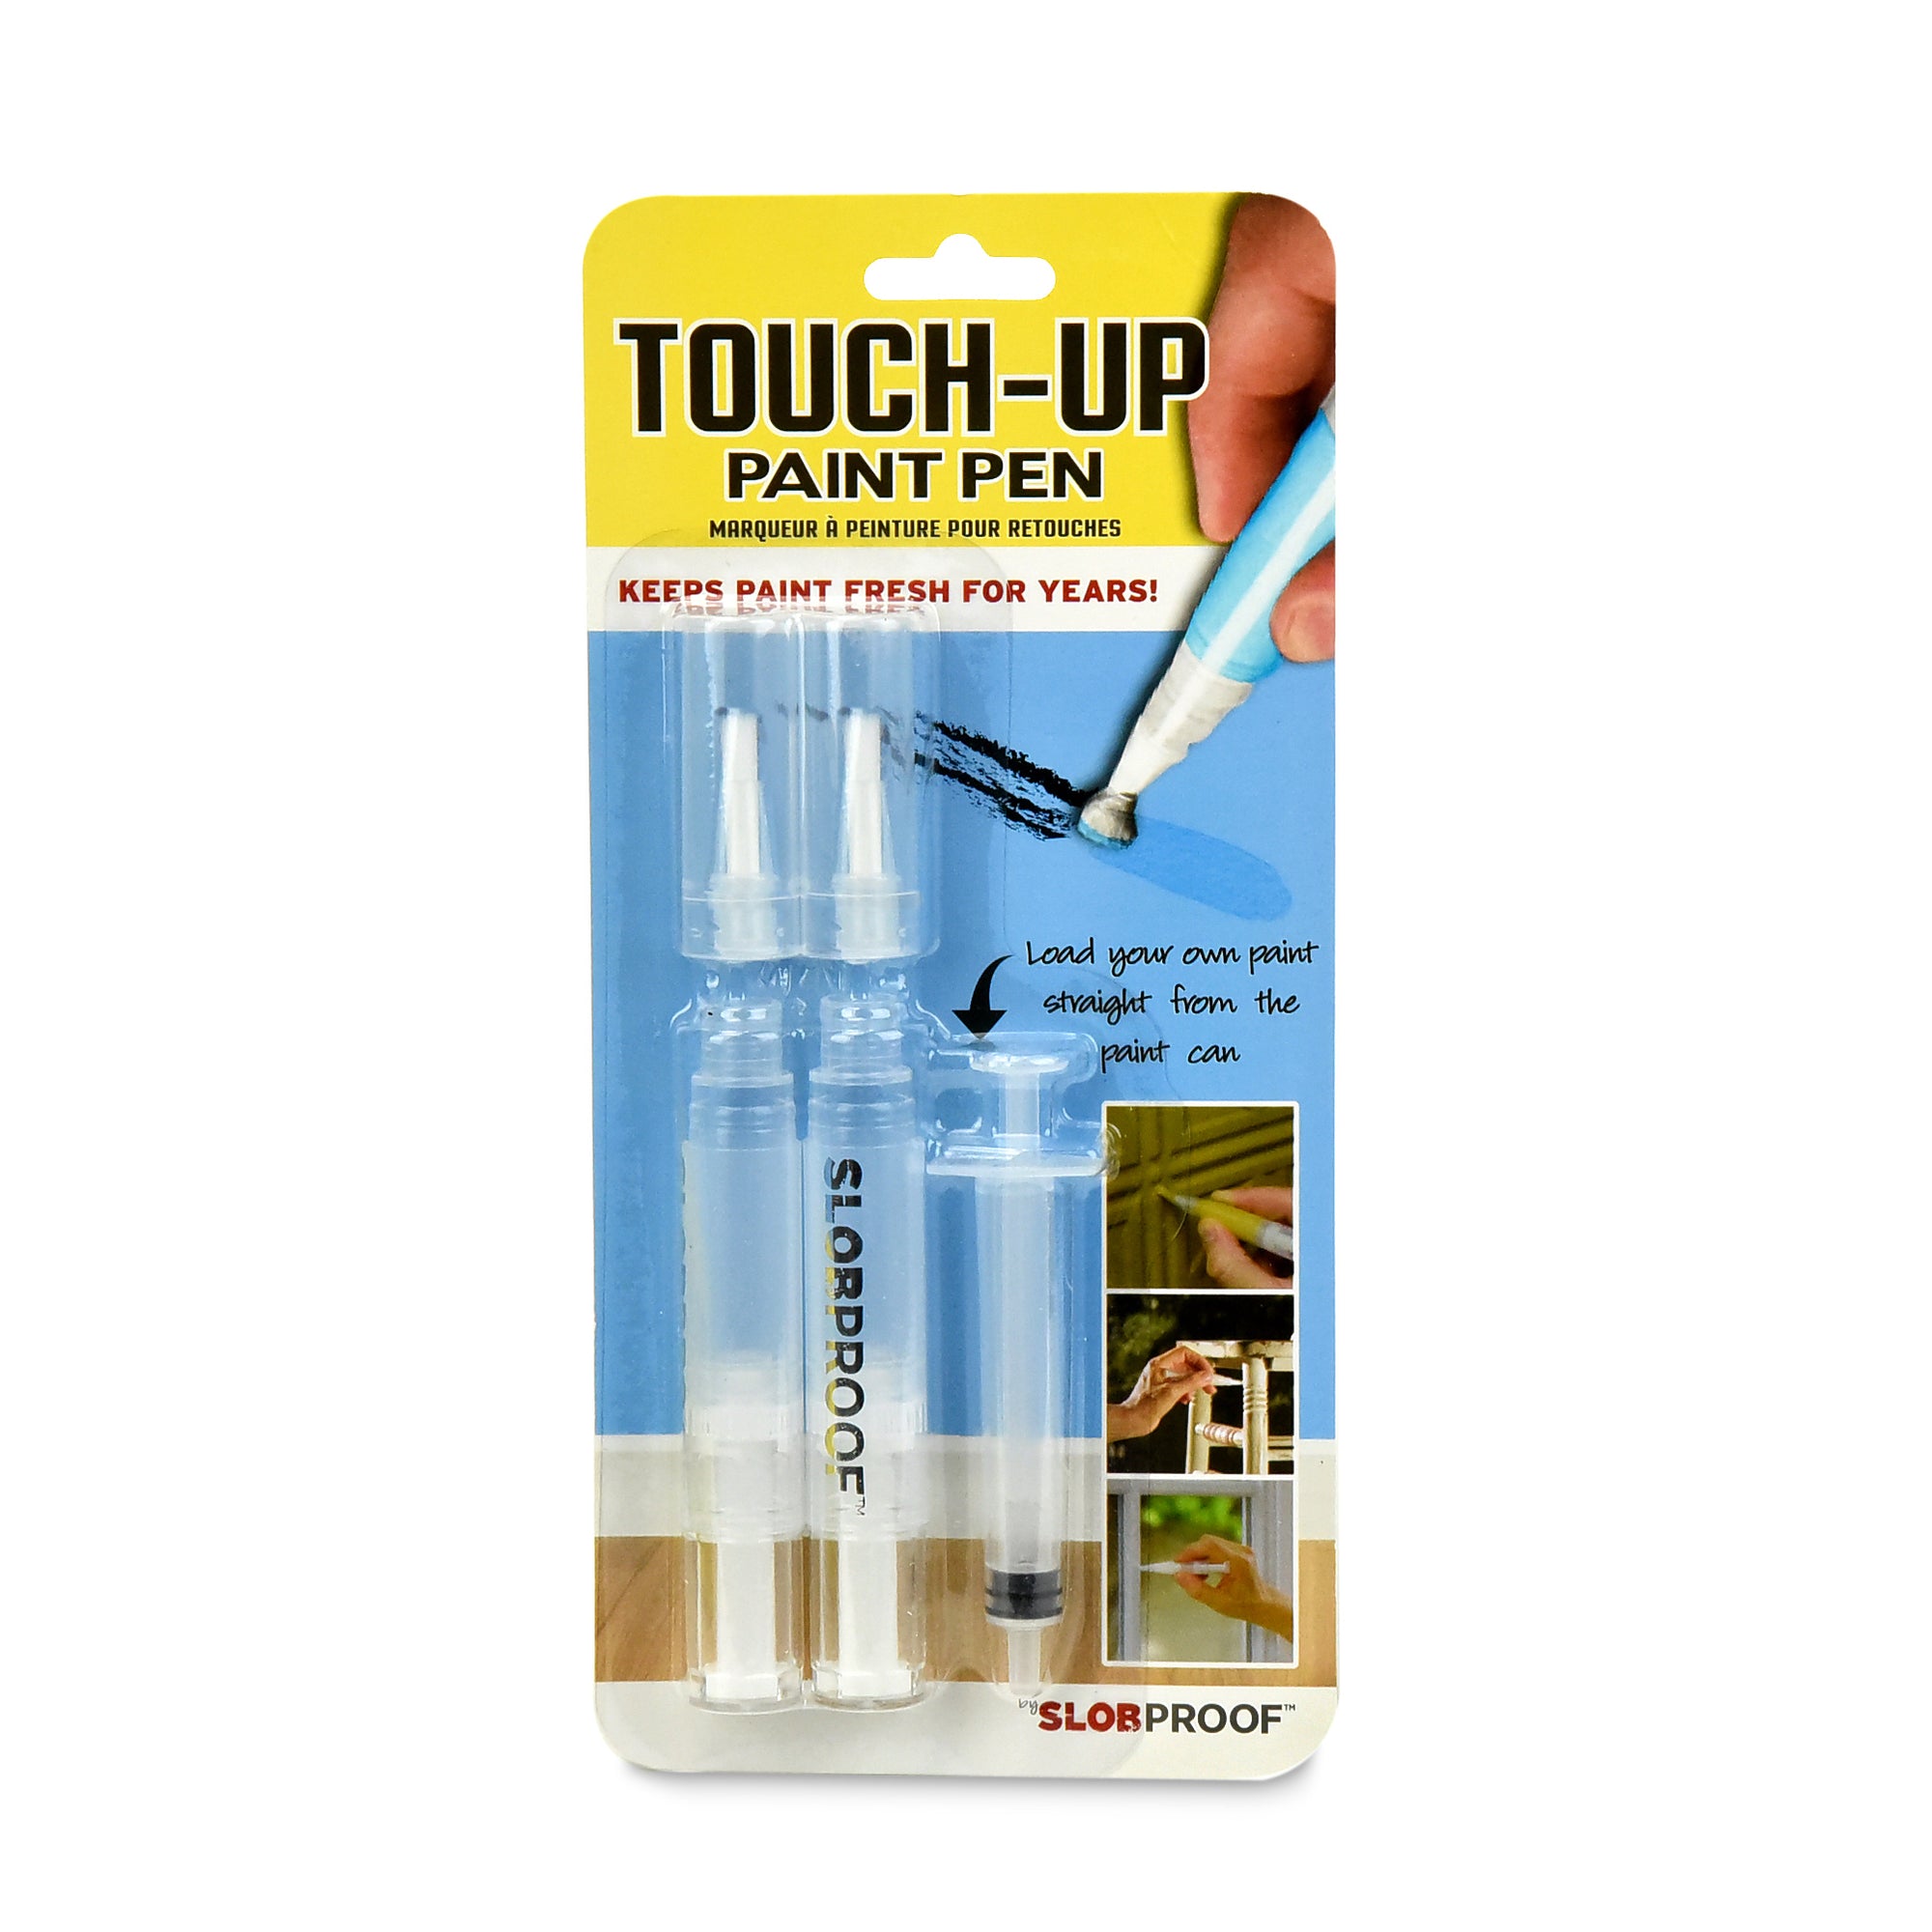 One of my favorite  Finds! This refillable paint touch-up